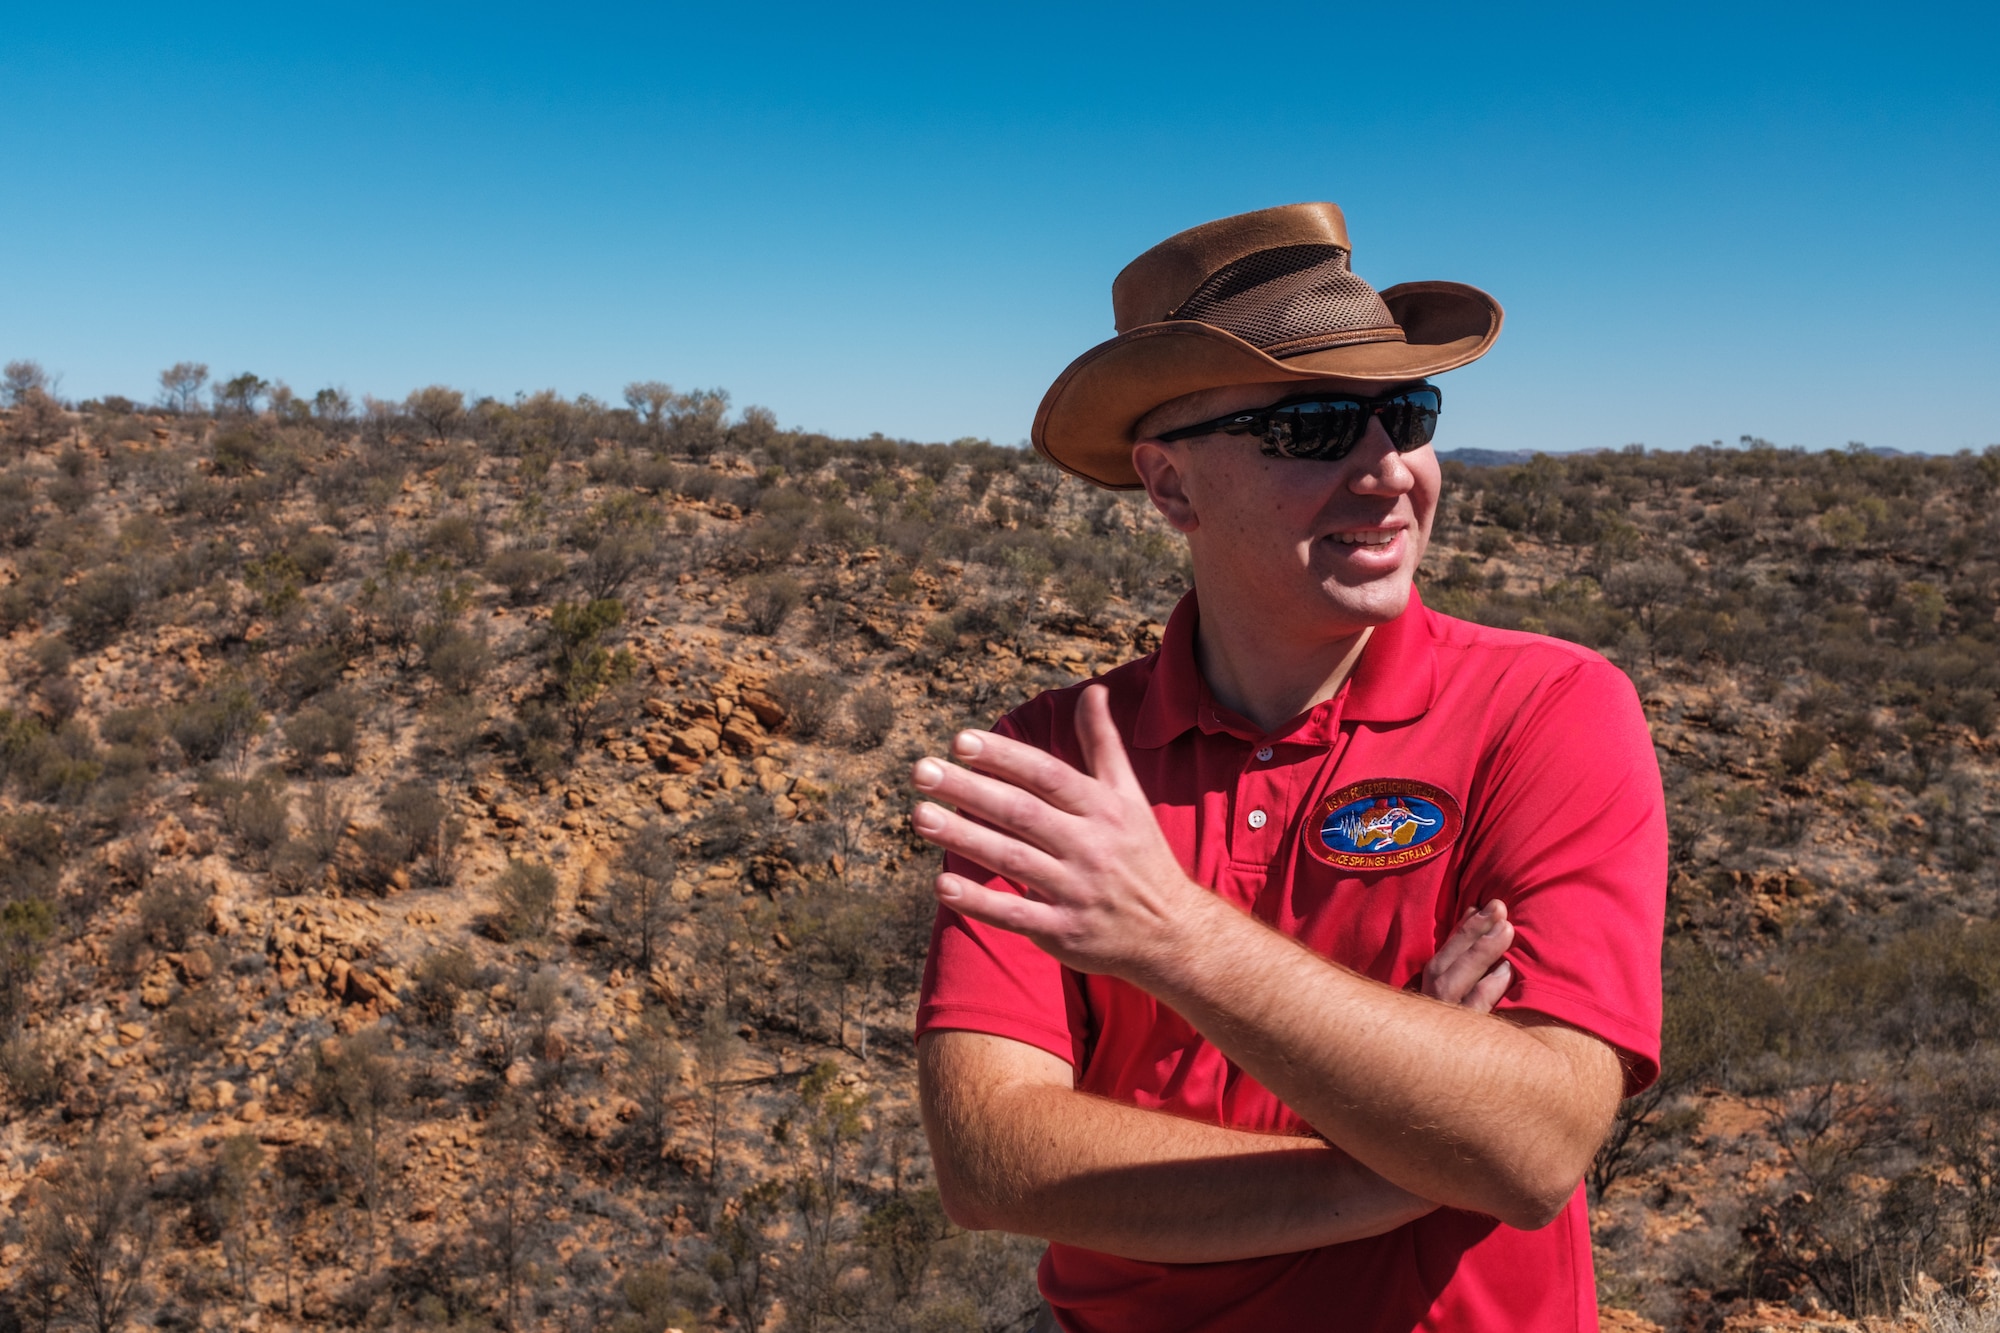 Tech. Sgt. Andrew Bryan, 709th Technical Maintenance Squadron, Detachment 421 noncommissioned officer in charge of maintenance, supervises three Airmen in charge of maintaining a seismic array in the outback of Alice Springs, Australia, Aug. 28, 2019. Data from the array is used to detect seismic activity, to include nuclear detonations or earthquakes. (U.S. Air Force photo by Master Sgt. Benjamin Wilson)